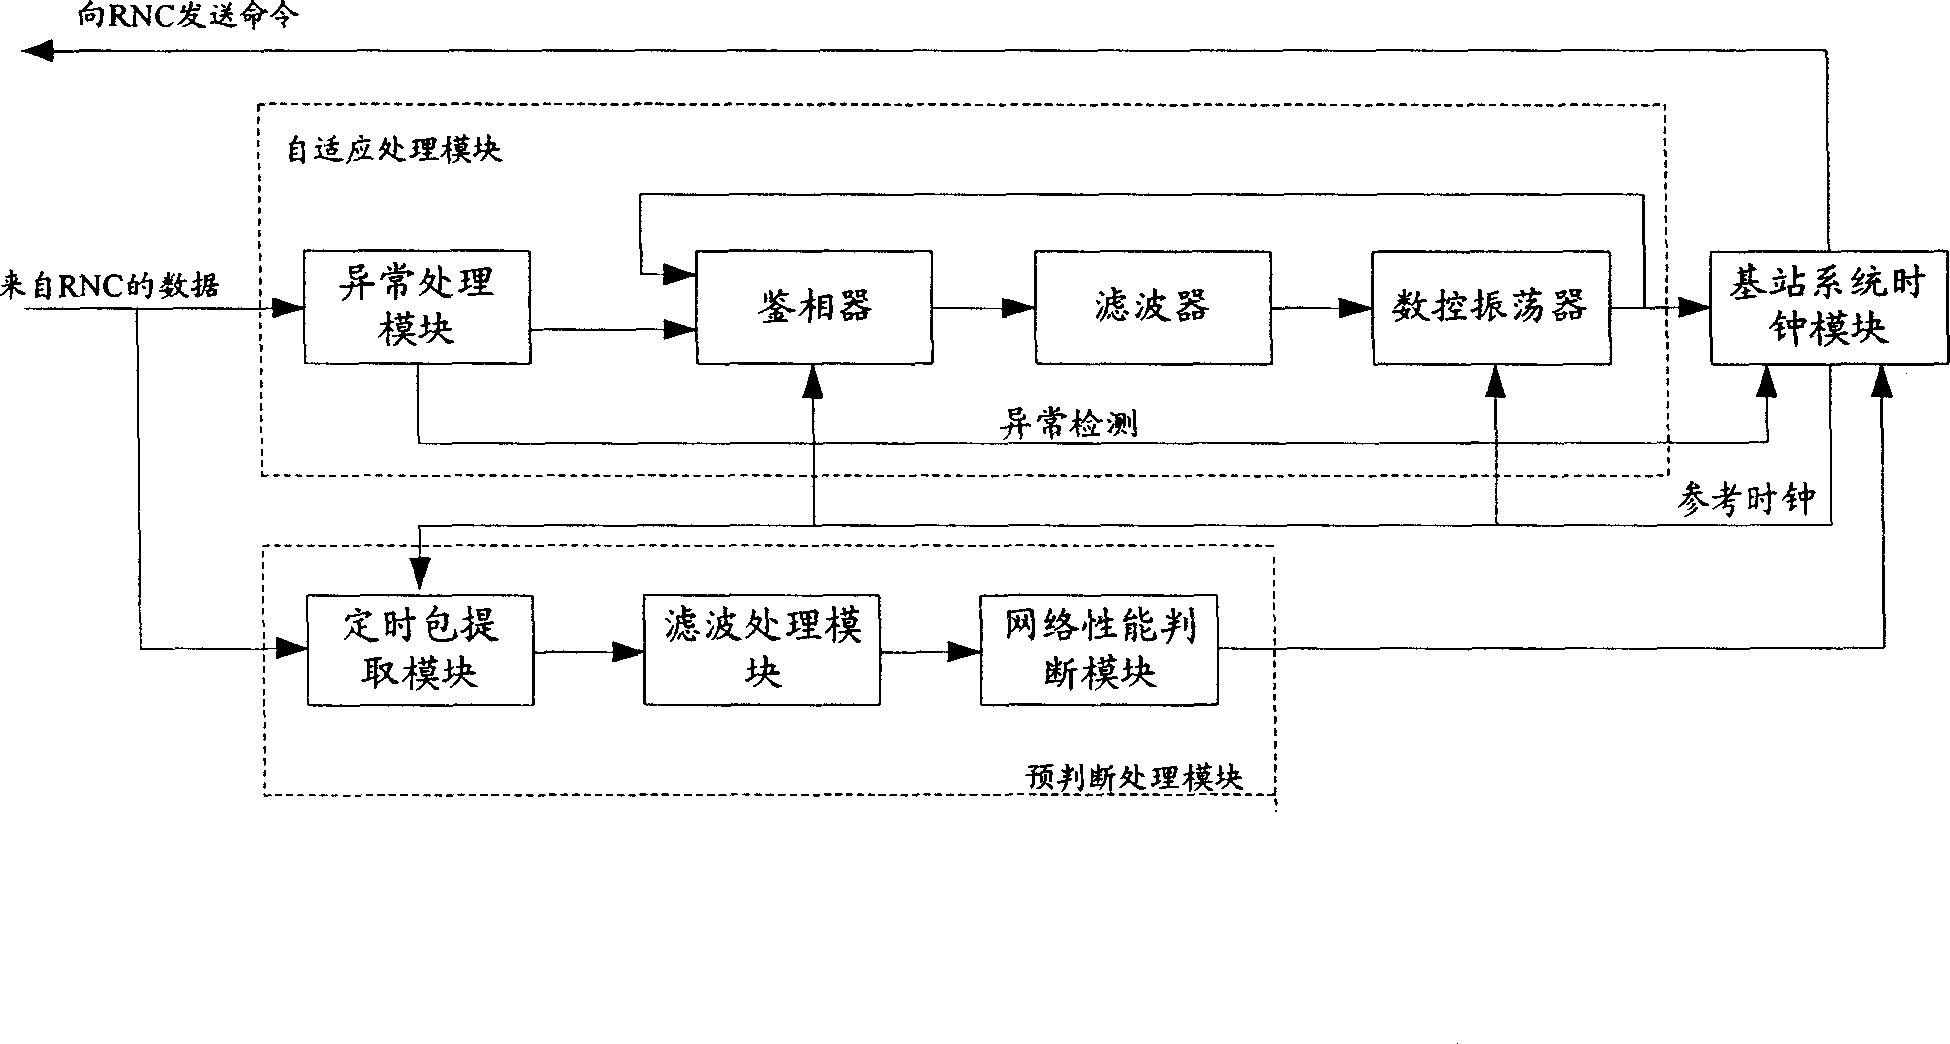 Clock reference device and method for IP network transmission base station